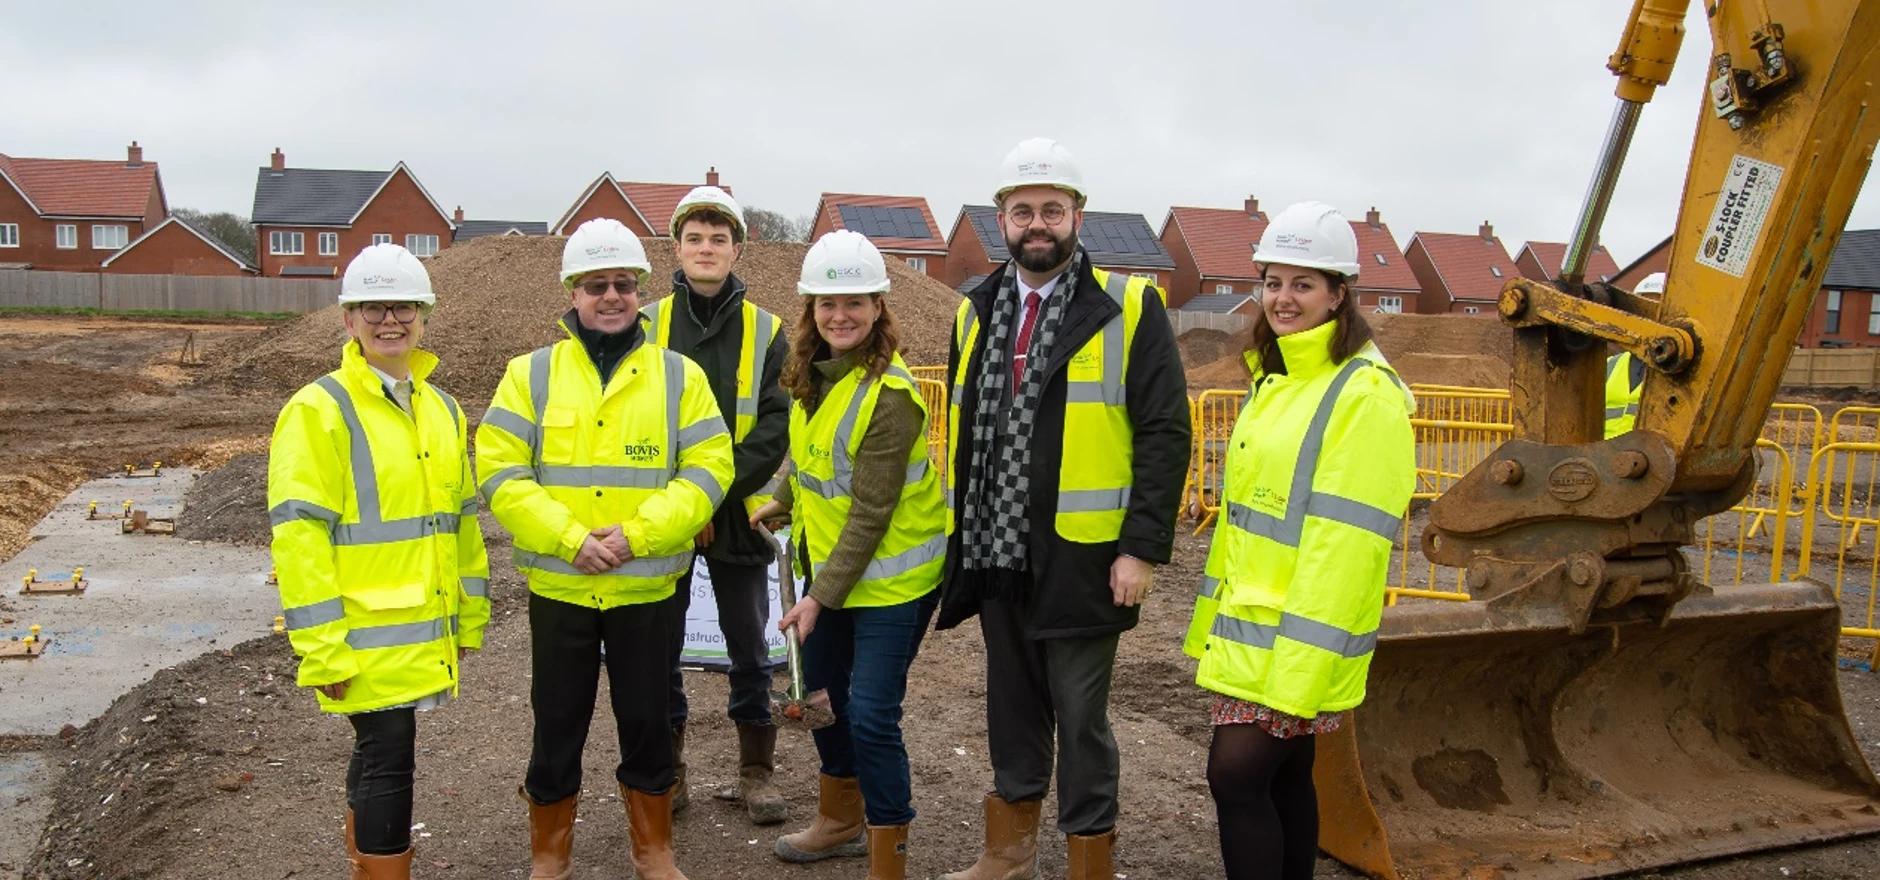 Gillian Keegan, Local MP and Secretary of State for Education attended the Minerva Heights groundbreaking on the 25 January.